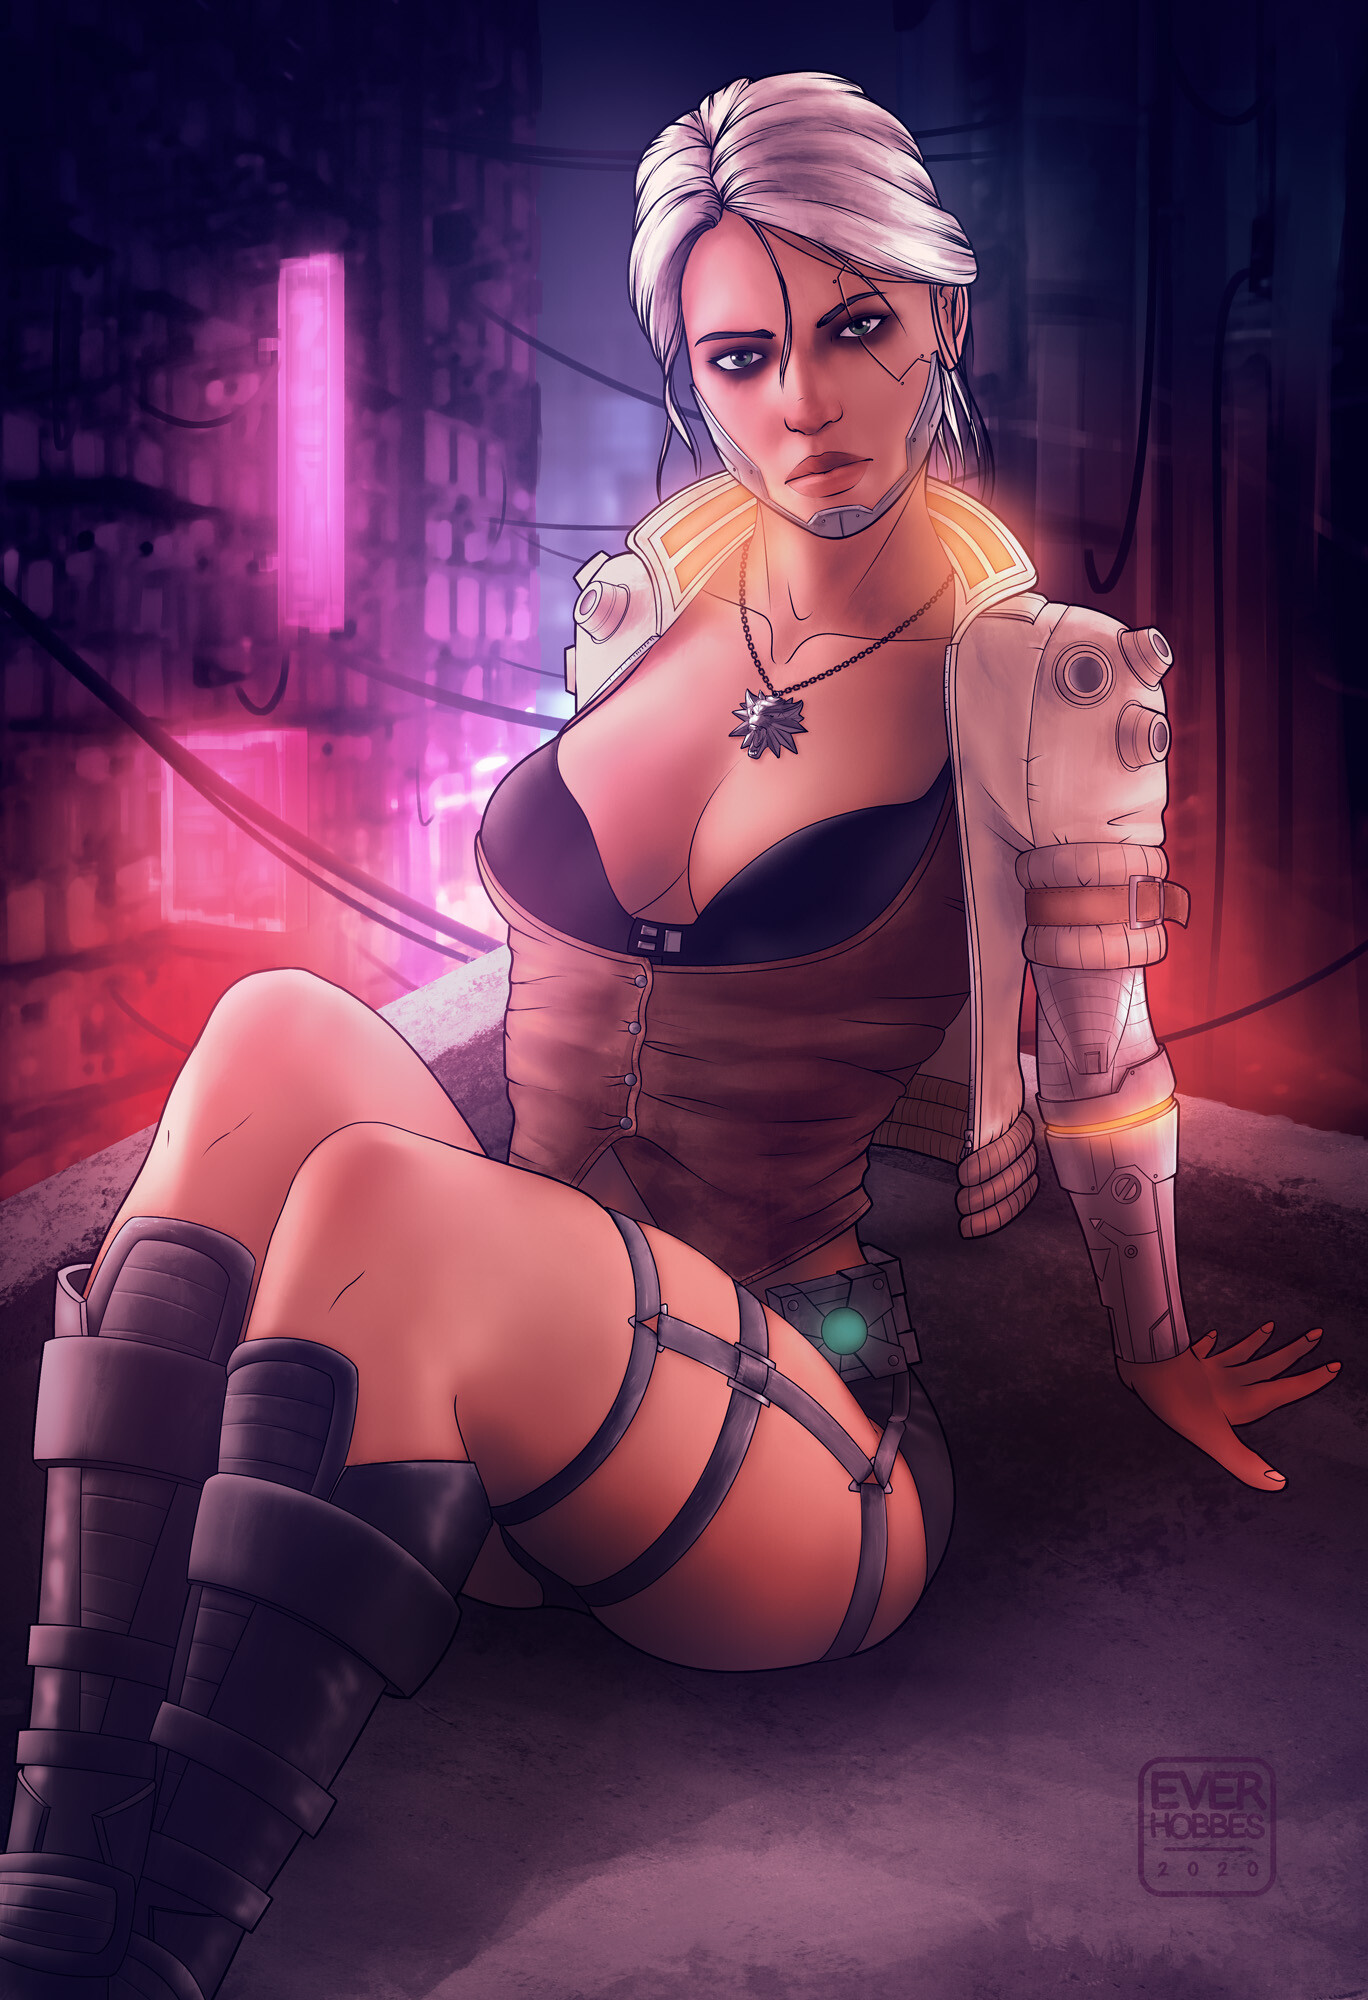 Ciri, The Witcher, CyberPunk 2077 Version by The Make Snake Sex Images Hq